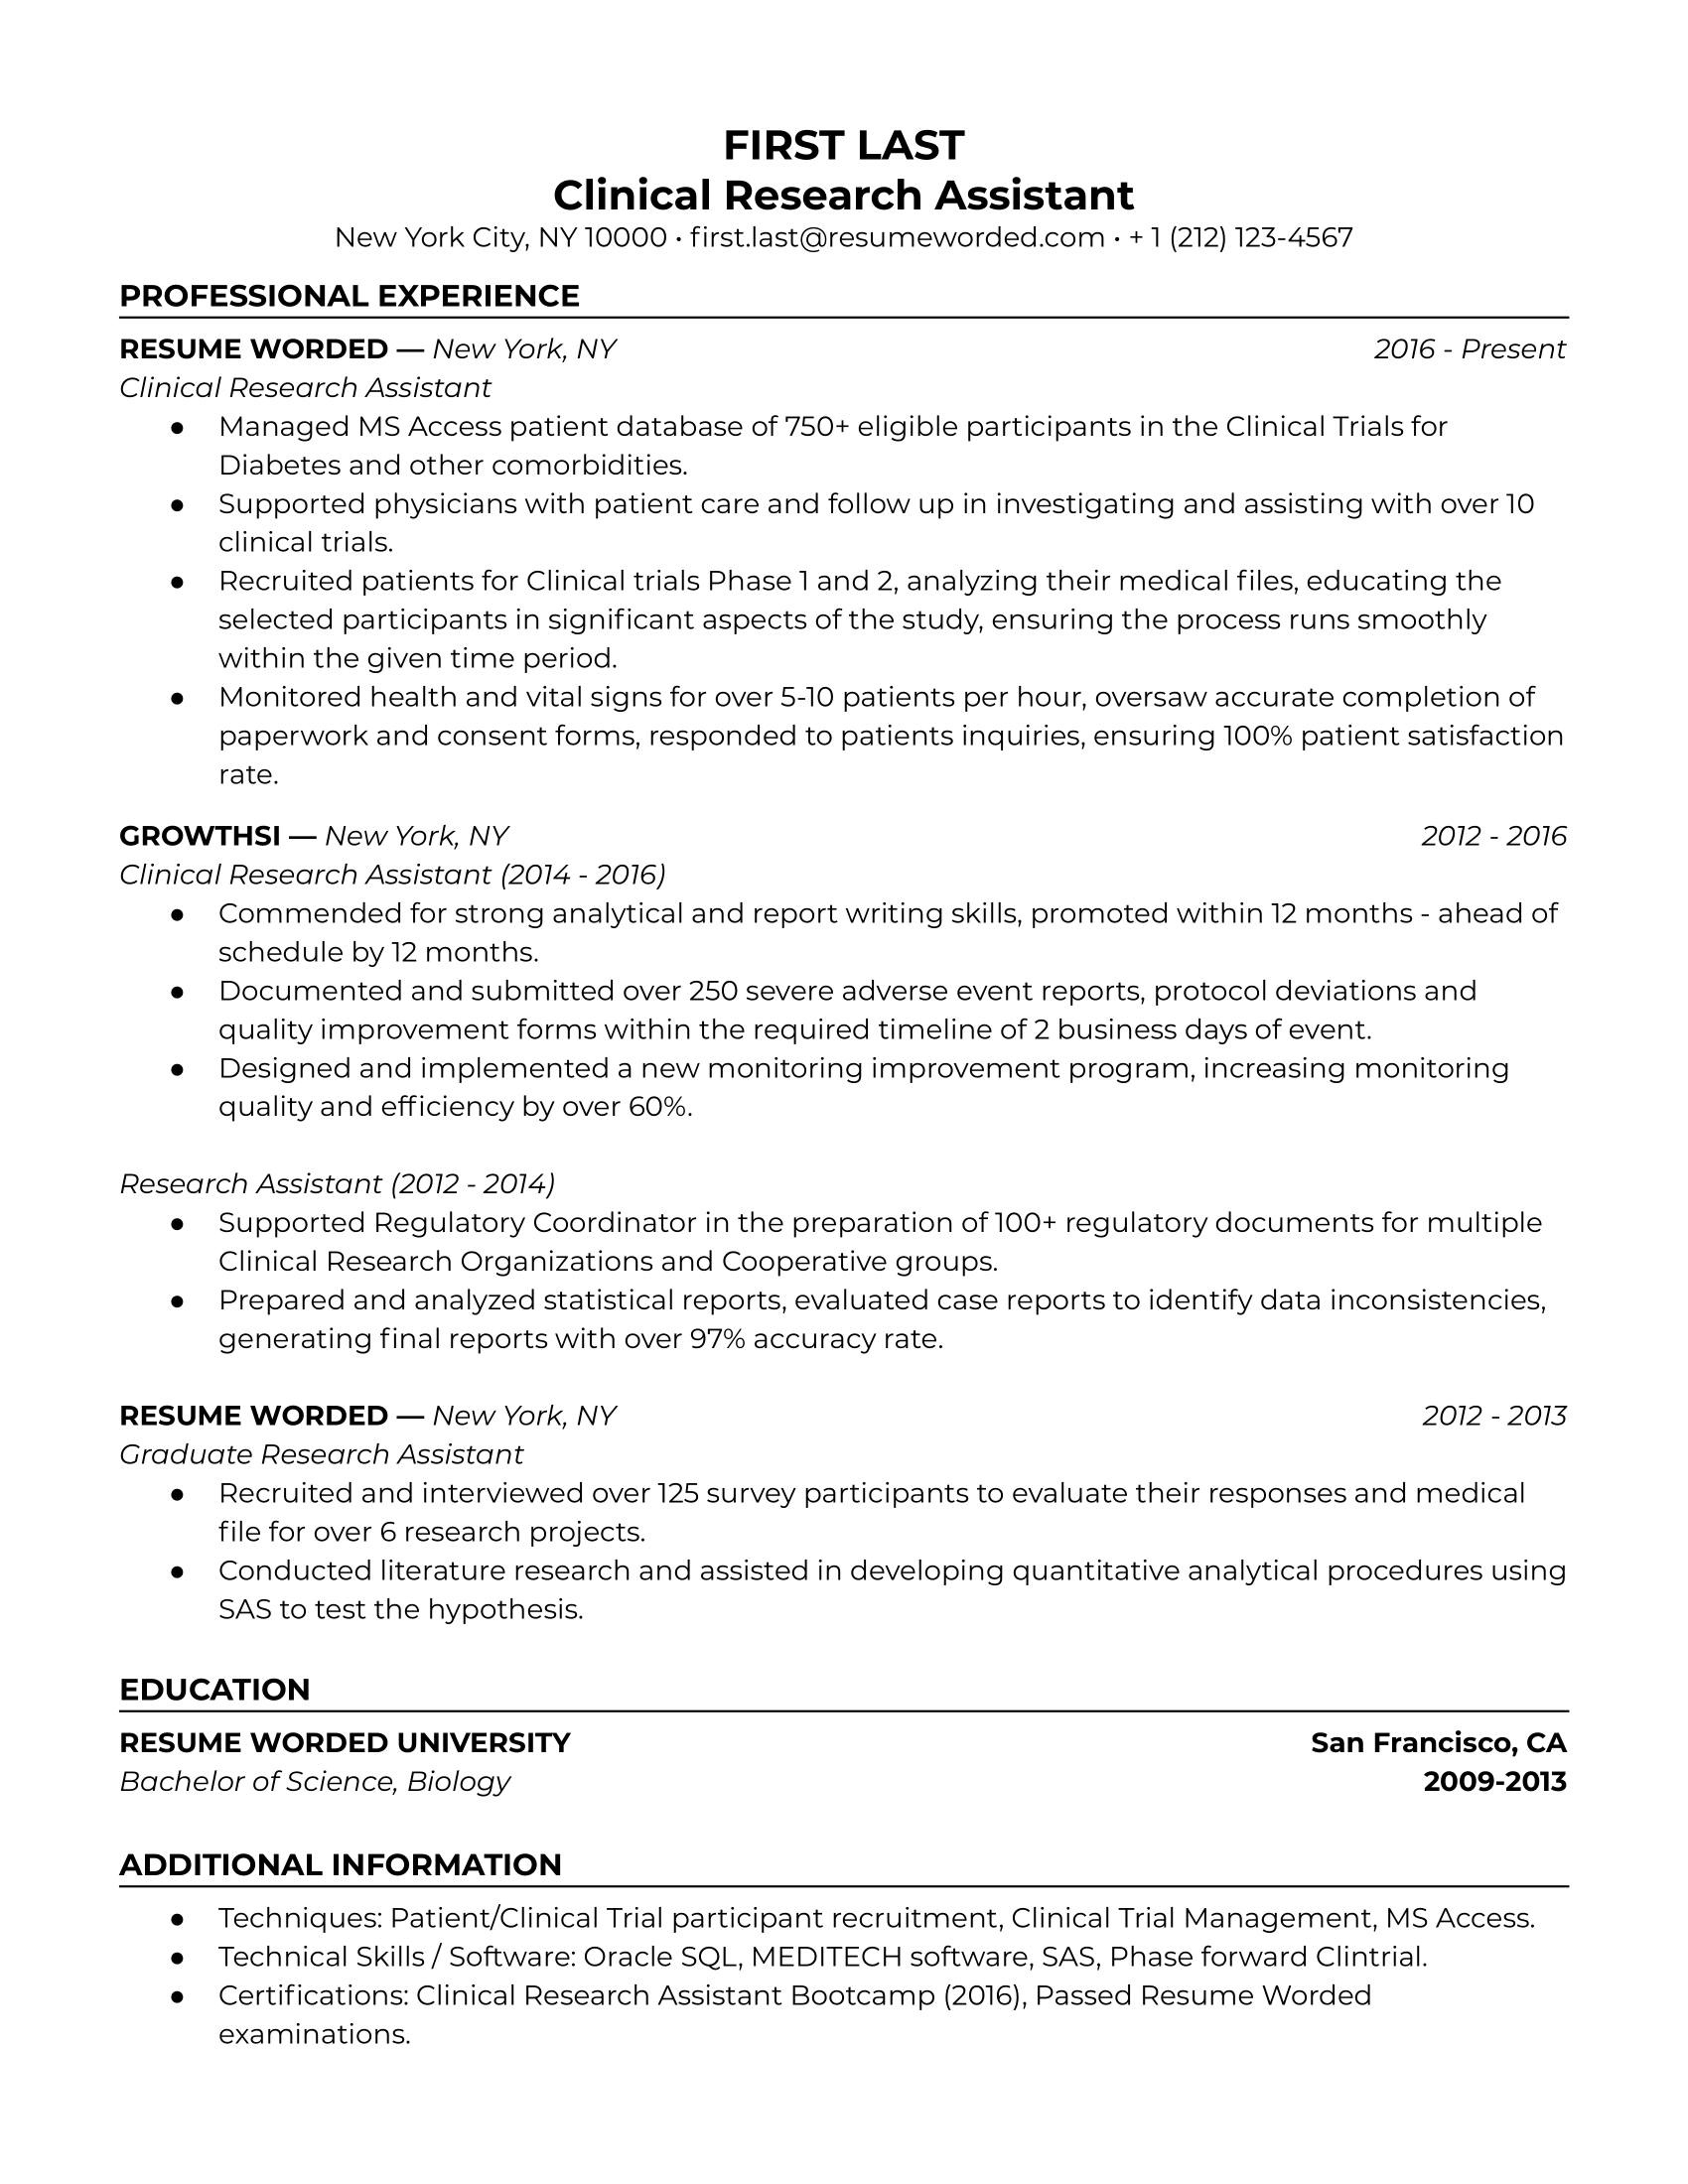 resume builder project research paper